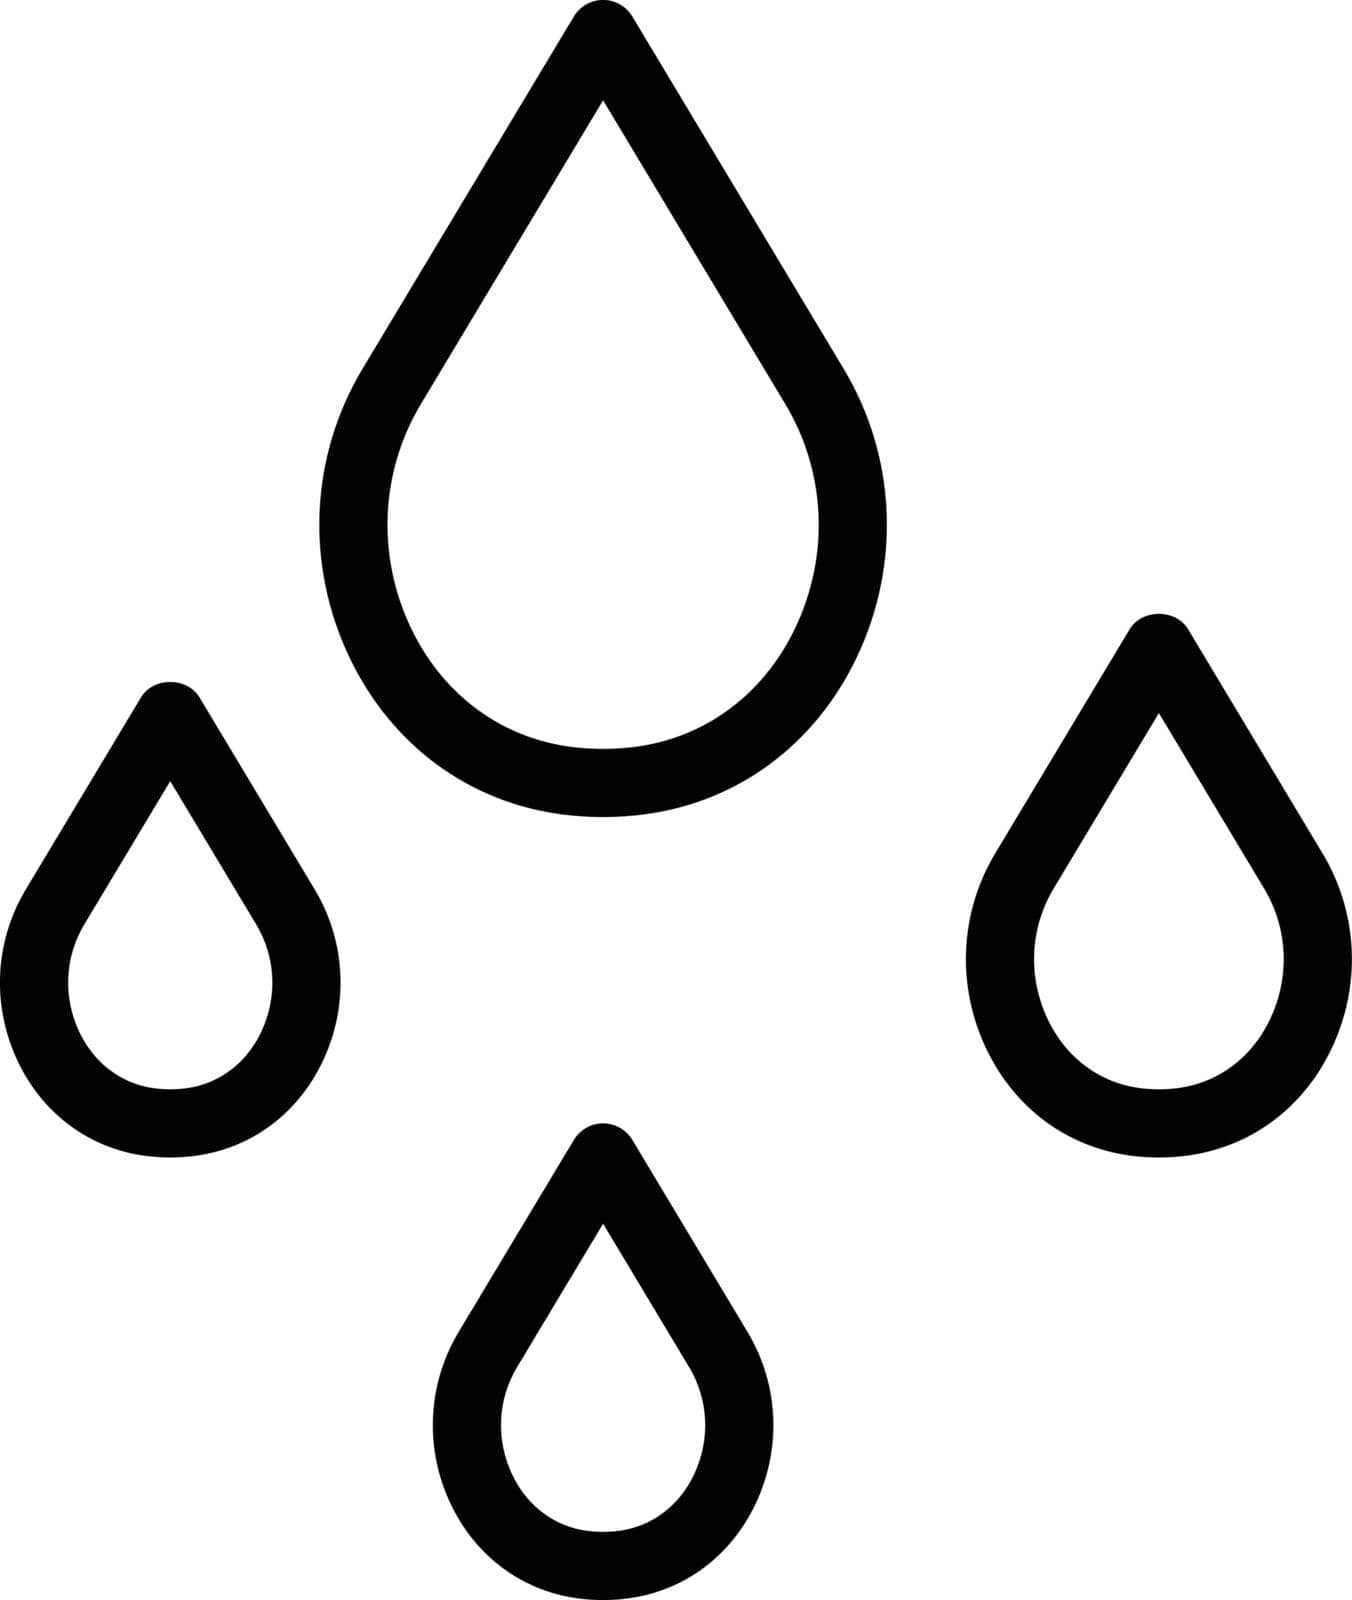 drops by FlaticonsDesign